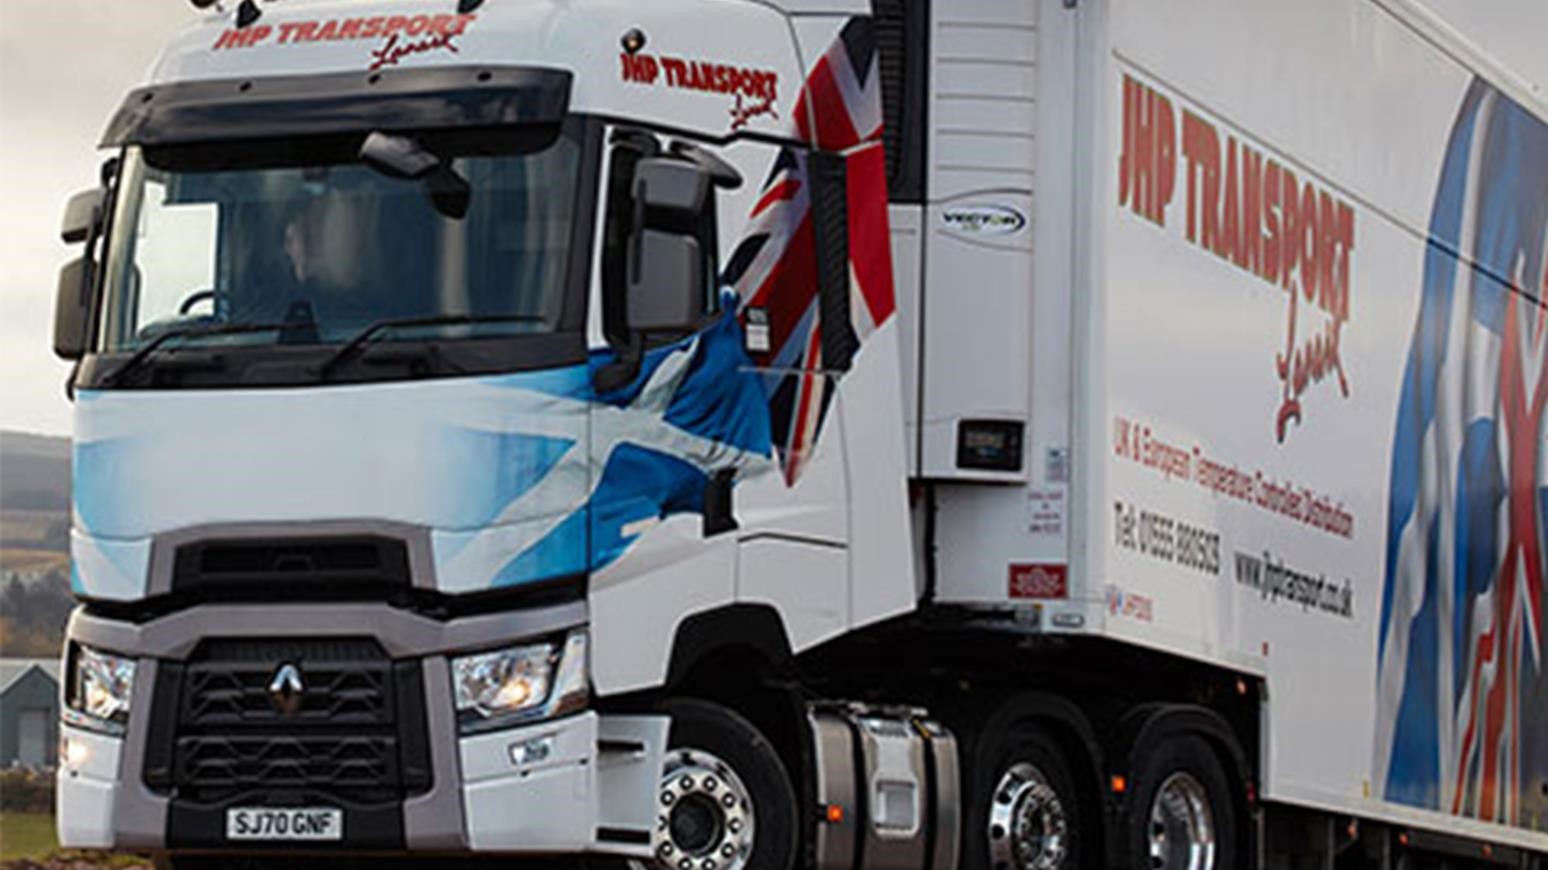 JHP Transport Adds Renault T520 High For Critical Trunking Work